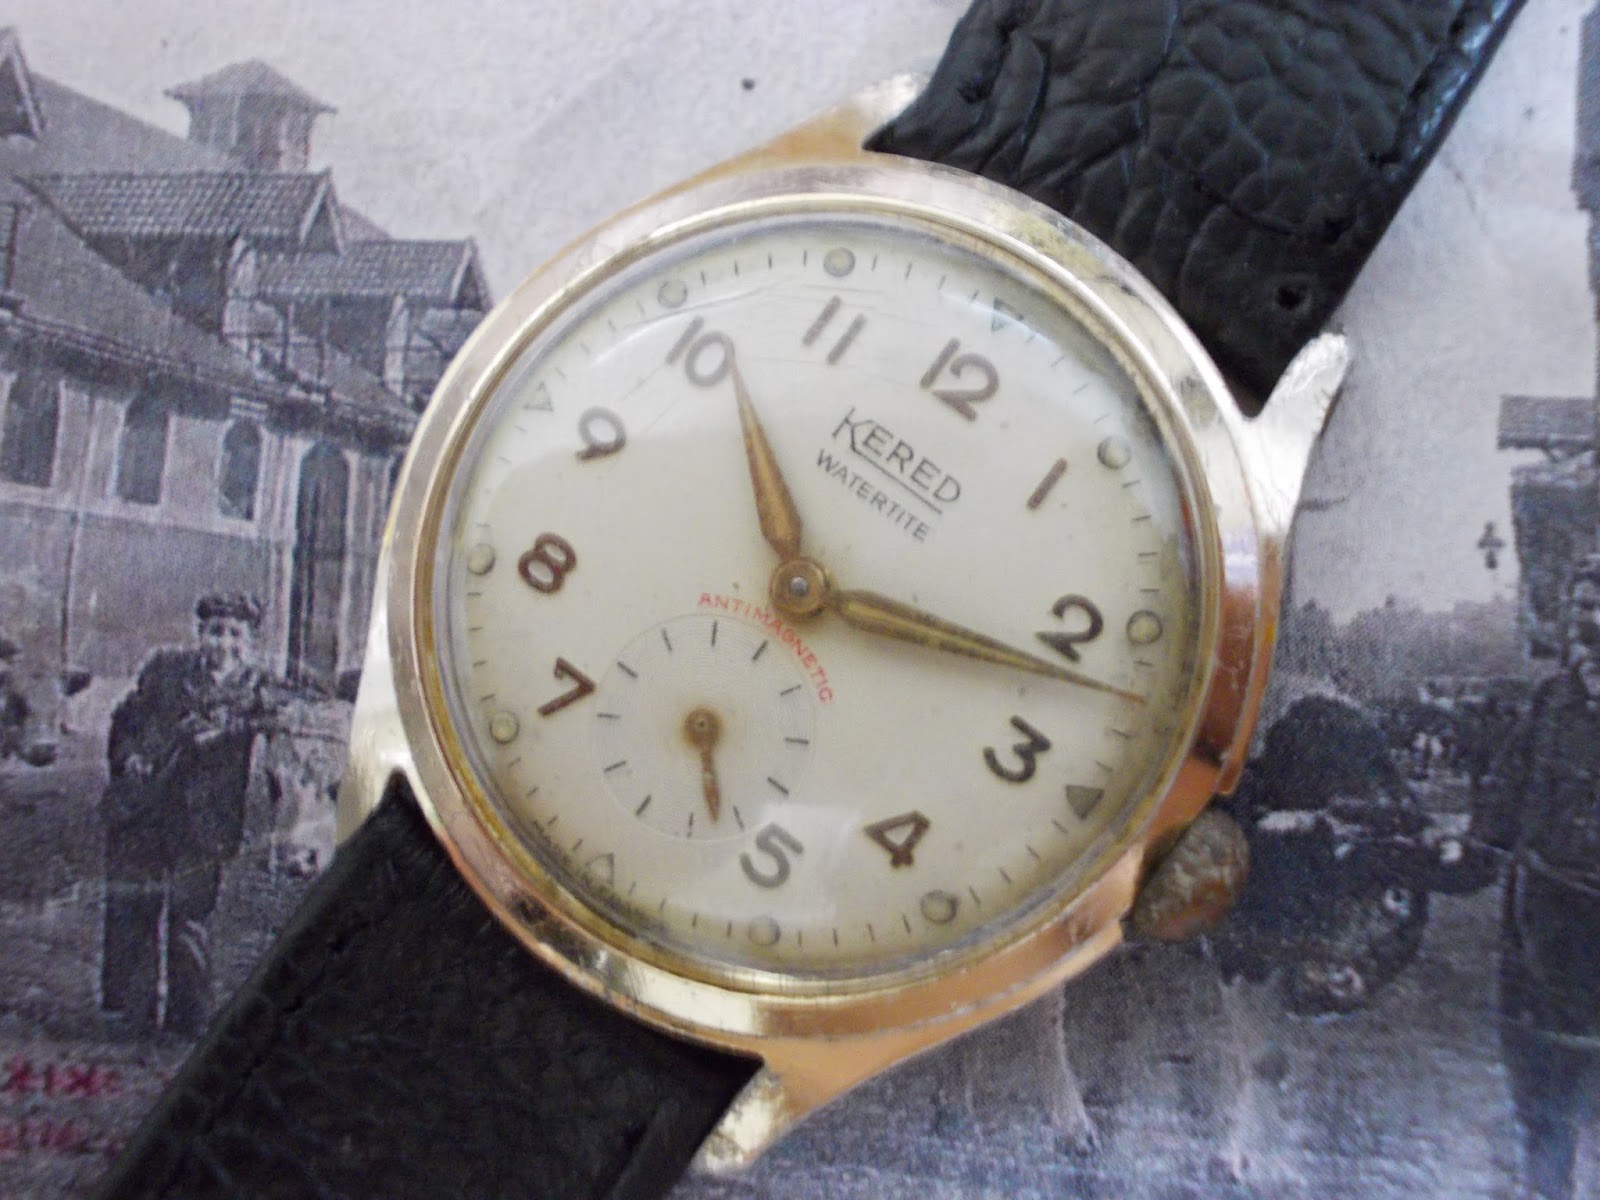 vintage watches: Kered RM190